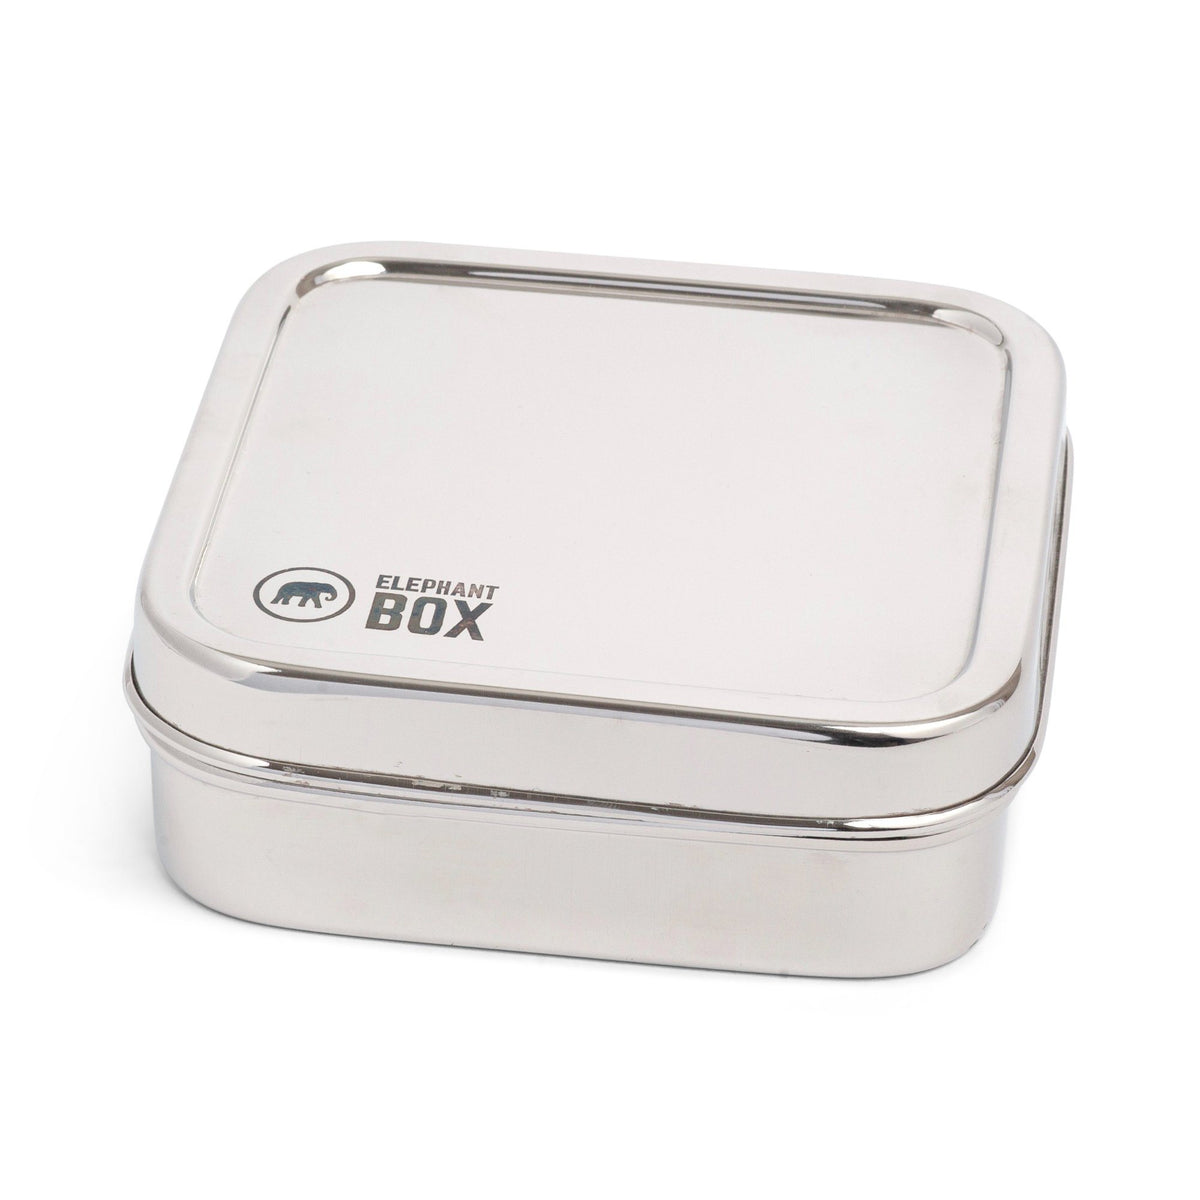 Elephant box. Stainless Steel lunch Box. Box for Salad. Opened Box for Salad.